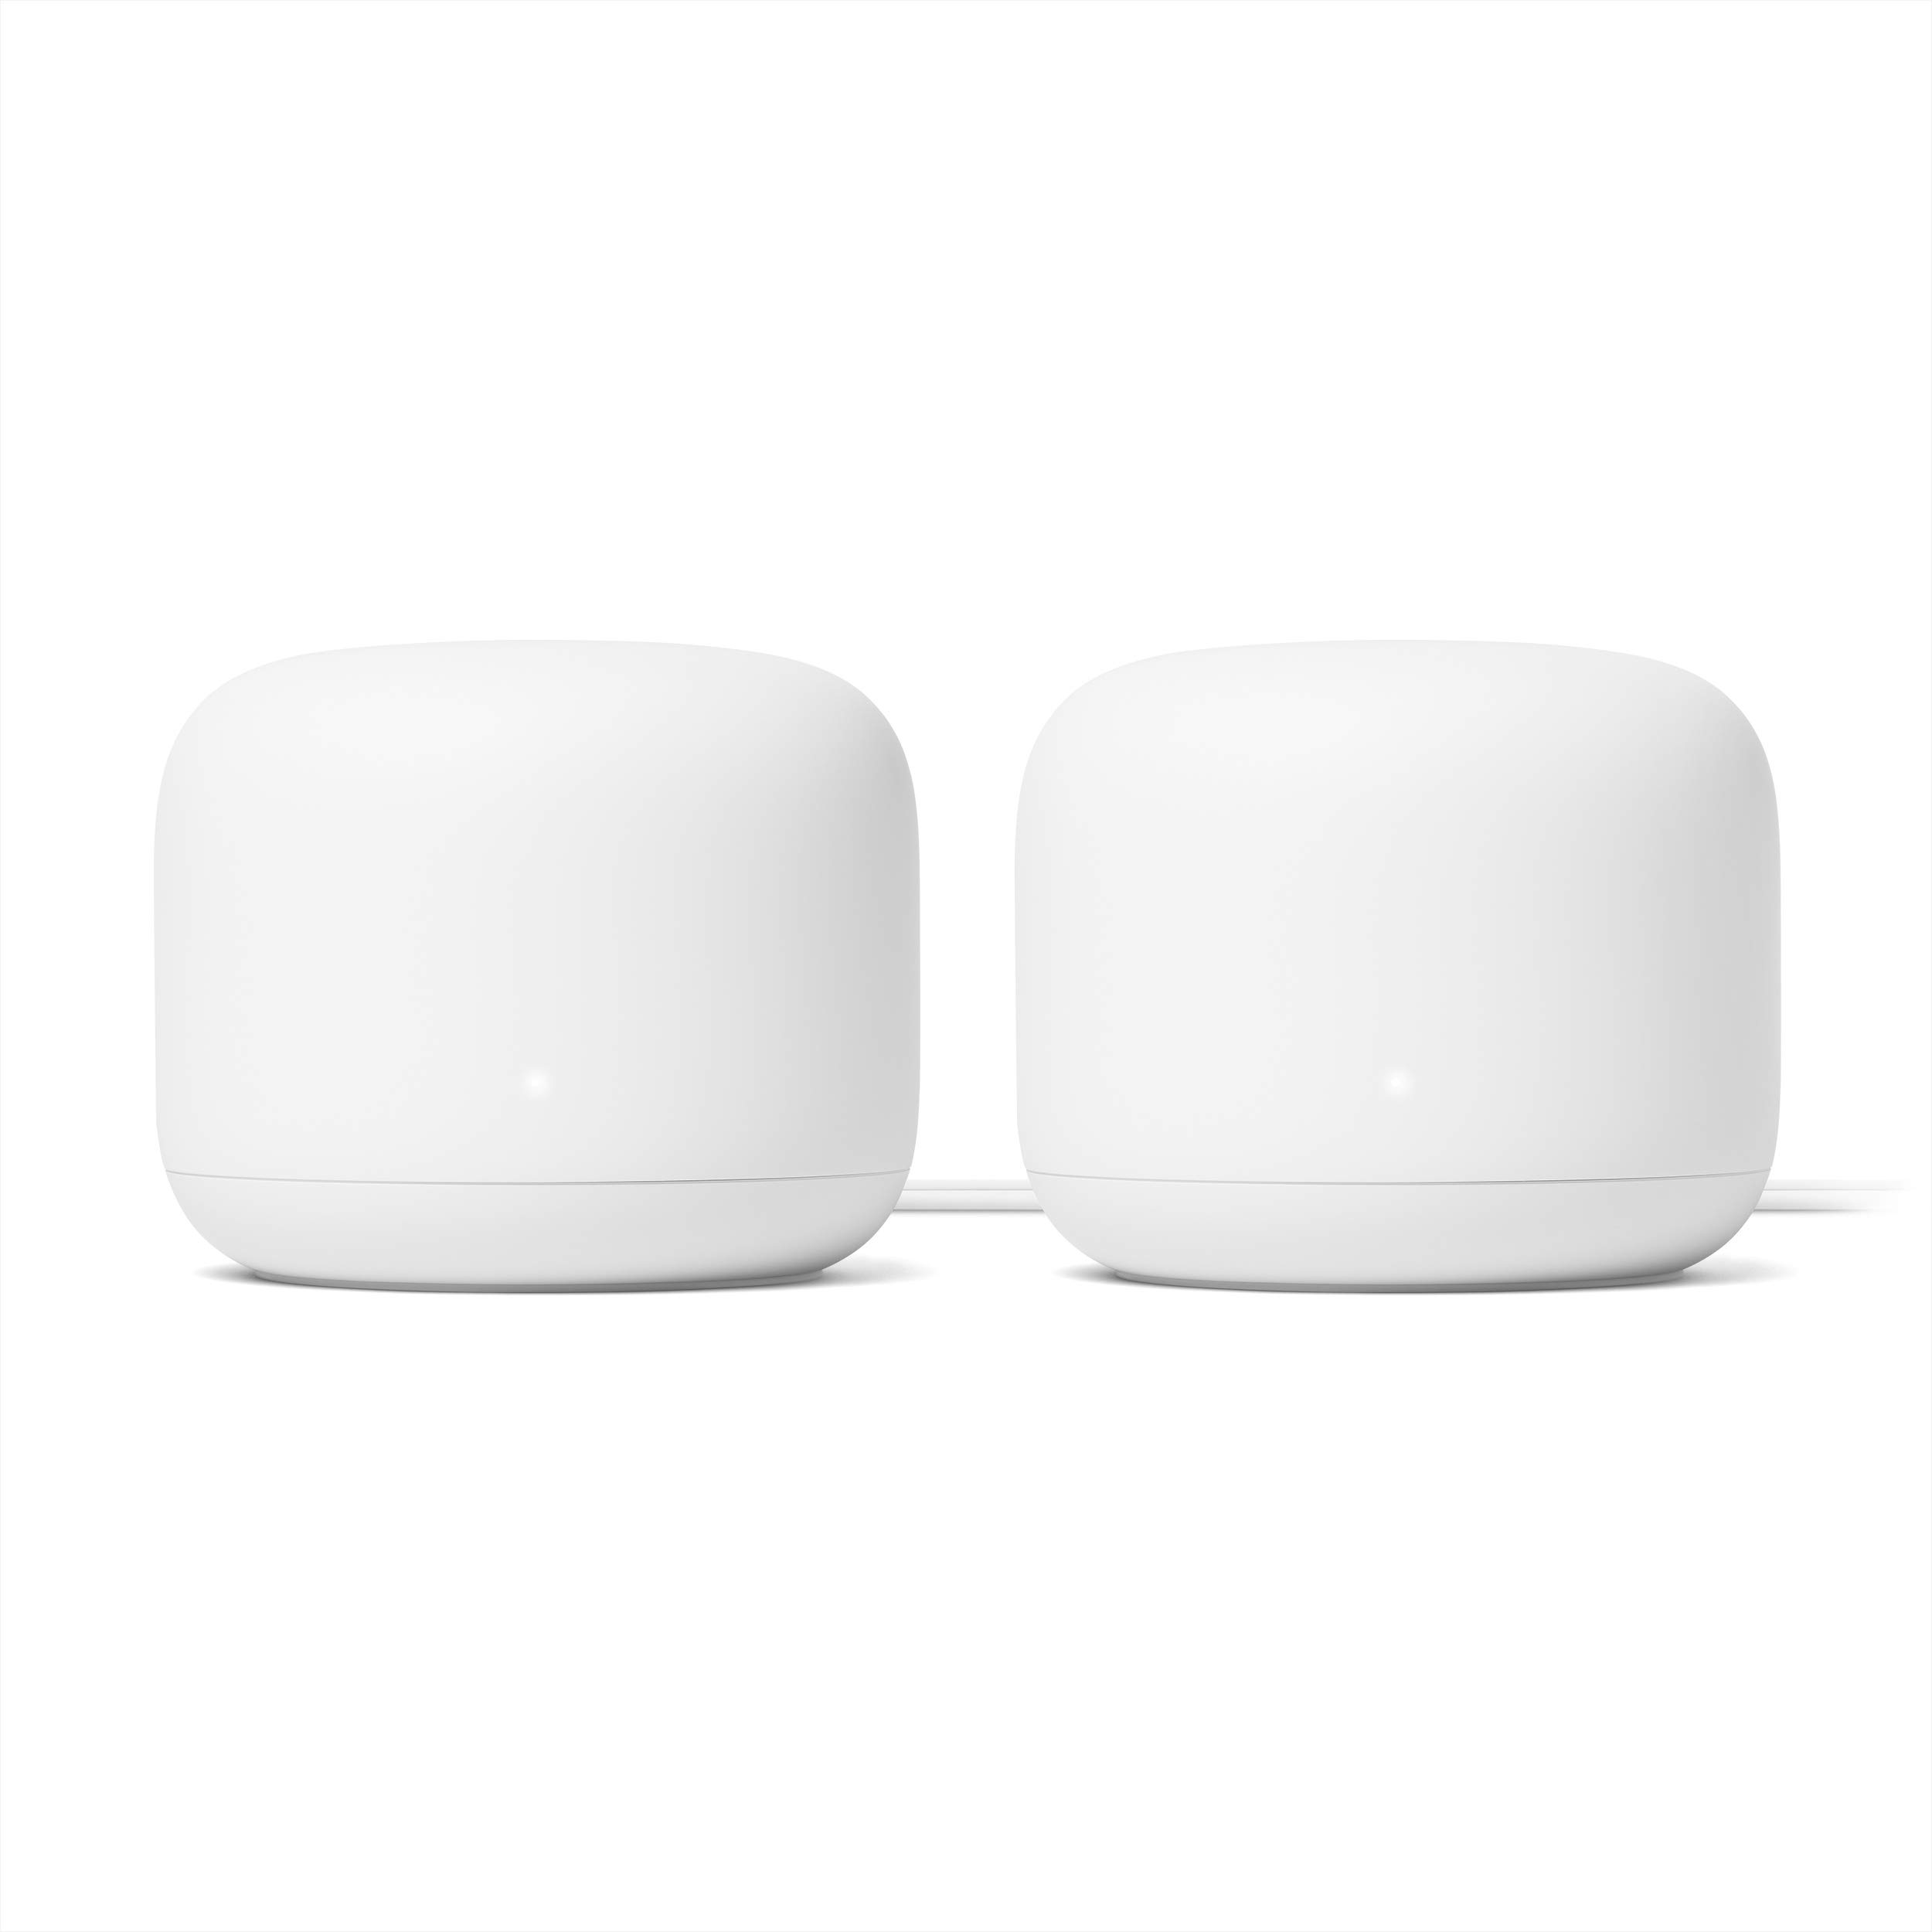 2-Pack Google Nest WiFi Dual Band AC2200 Mesh System $107 ($53.50 each) + Free Shipping